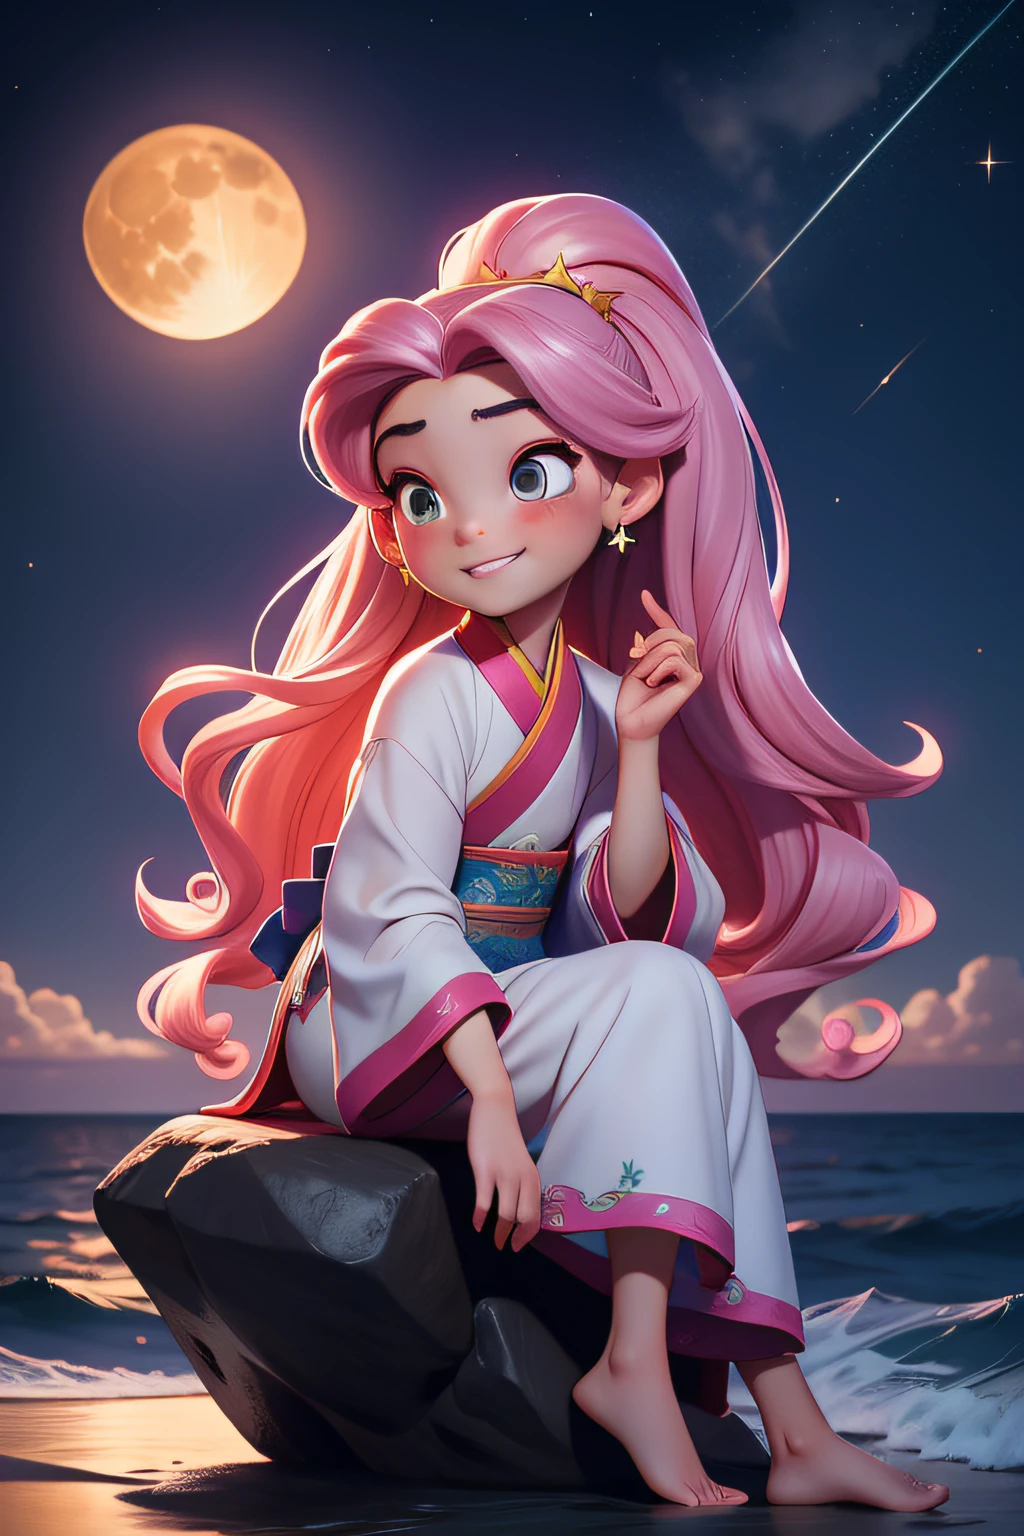 tmasterpiece, best qualityer, Thirteen-year-old girl, long whitr hair，A pink-haired，Hanfu，Sit on the reef，One hand drags his chin，ssmile，The full moon gradually rises from sea level，the night，the ocean，calm seas，inverted image，coconut palms，The sky is full of stars，pixar-style，Disney  style，Chinese style